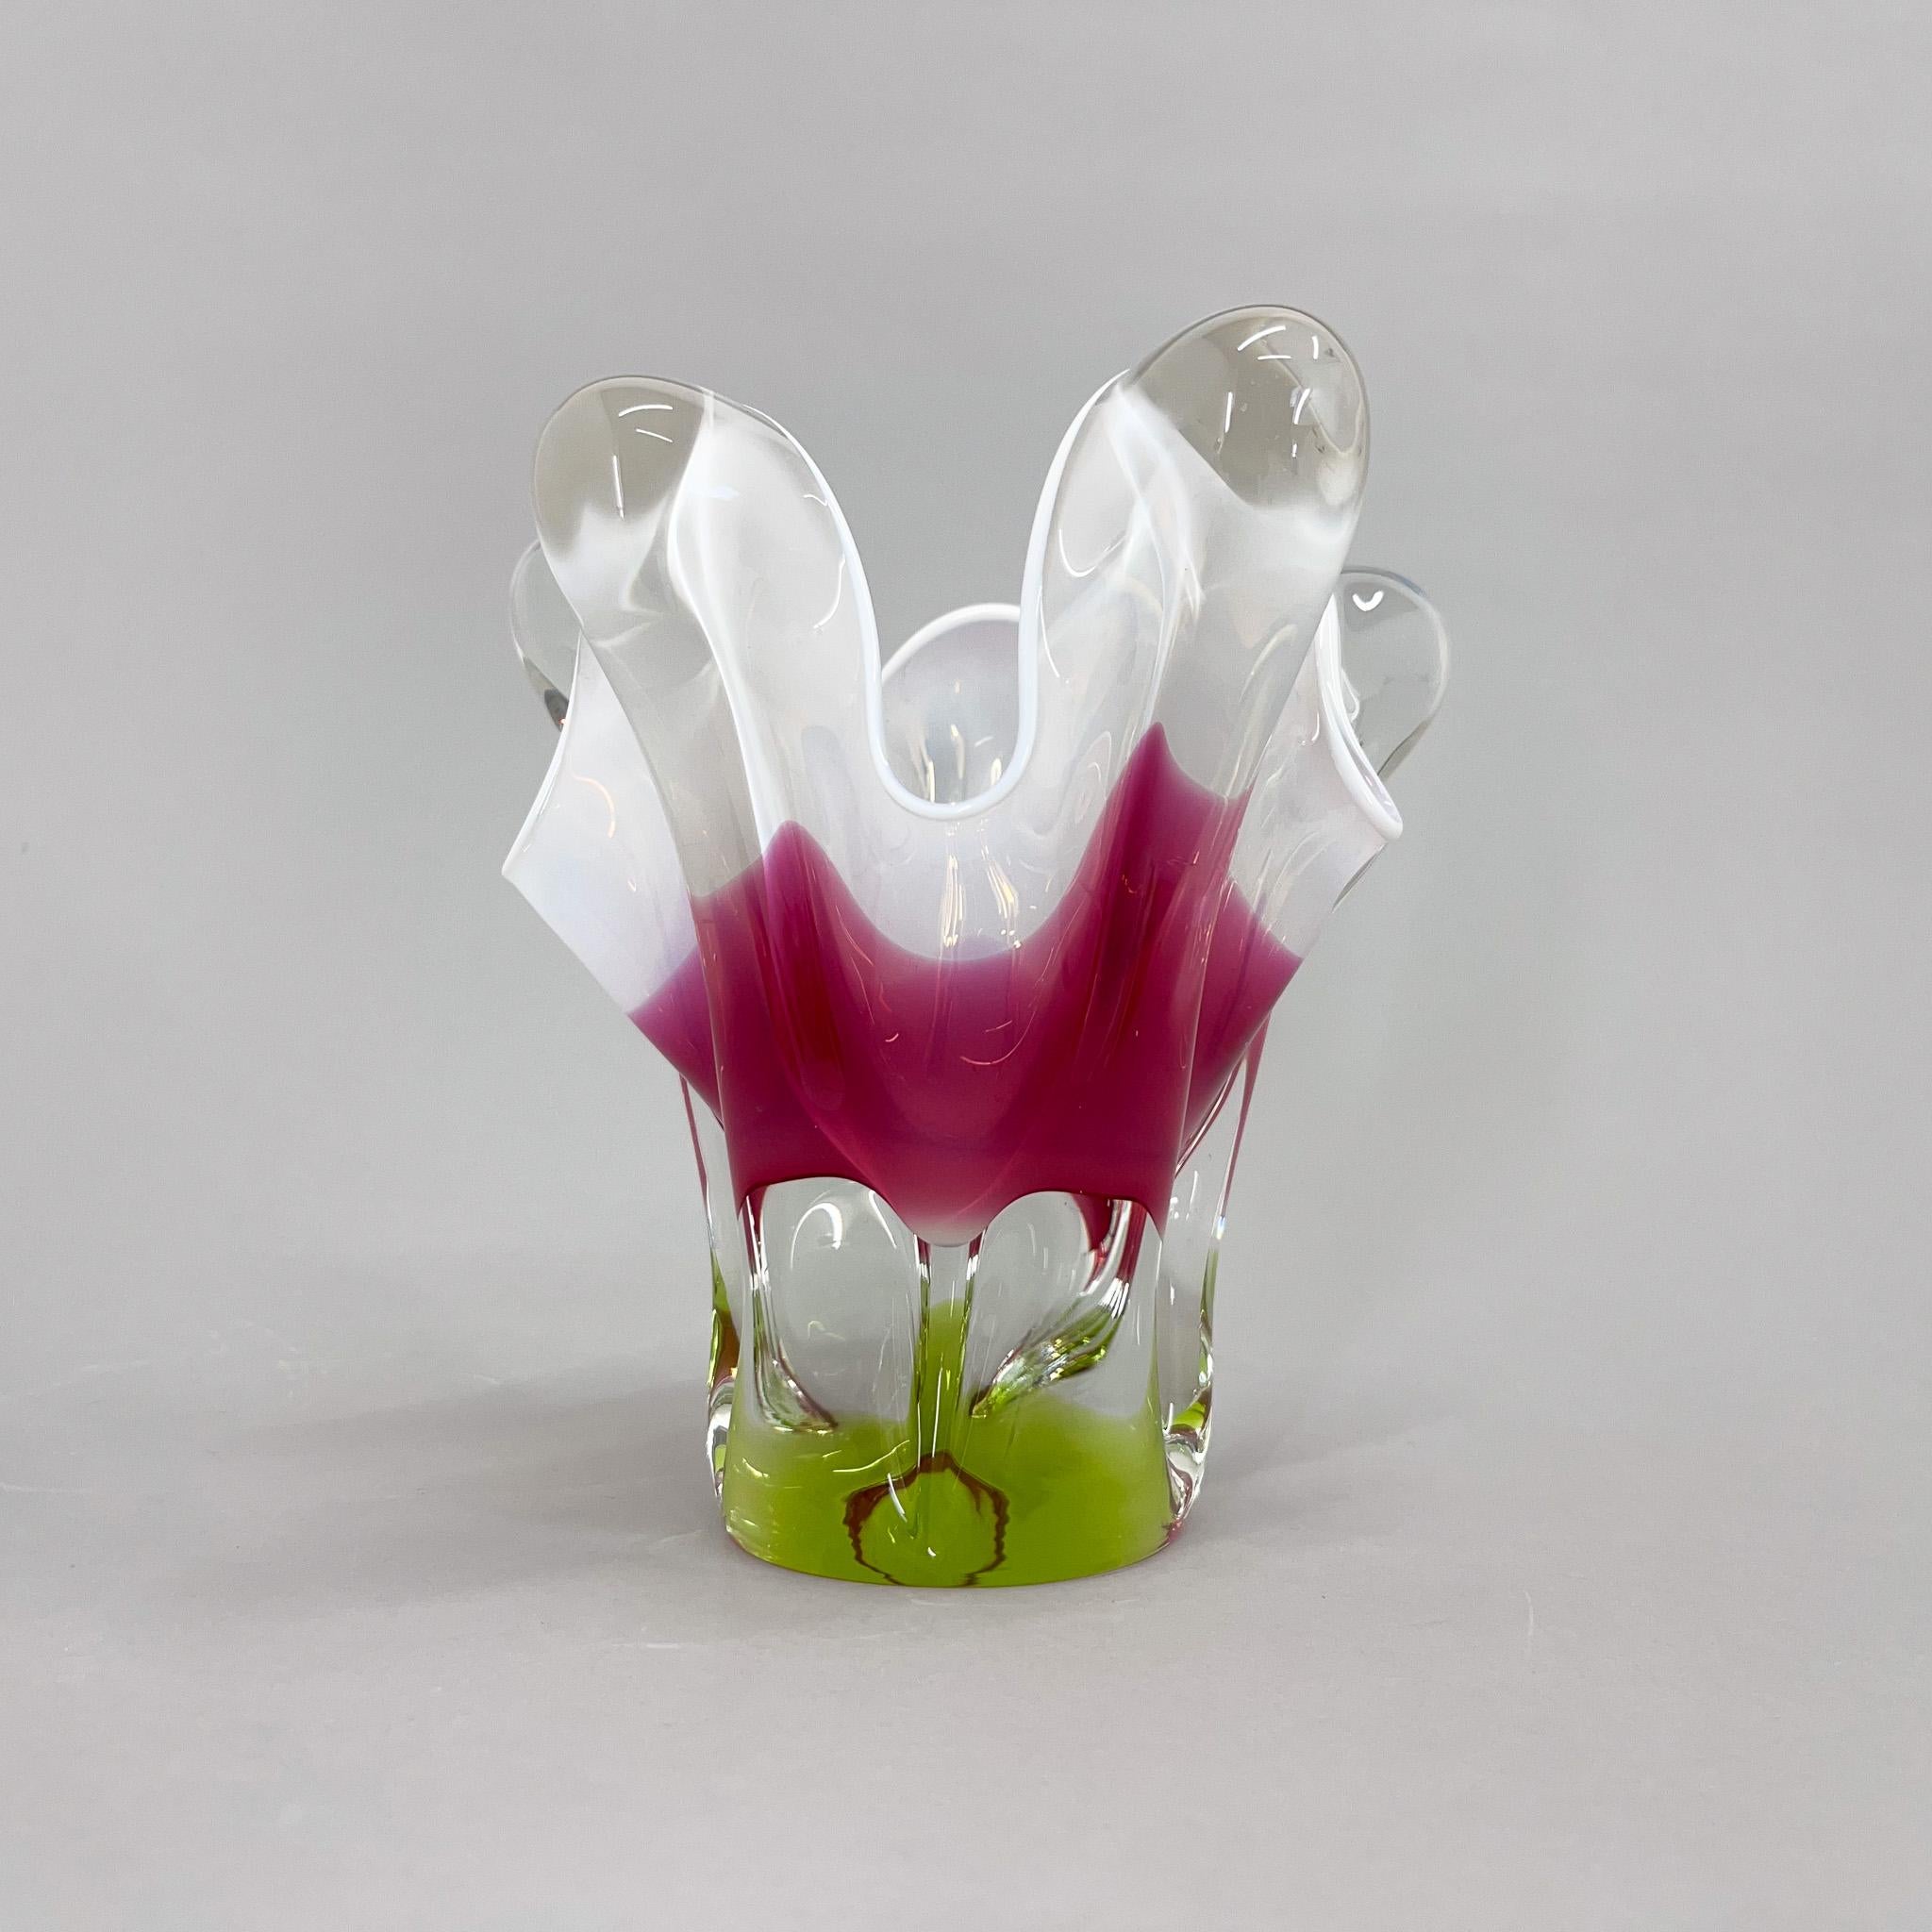 Sculptural Czech art glass vase, designed by Josef Hospodka in 1960's and made by the Chribska glassworks. Combination of pink, green and clear glass with a lovely opaque white rim. Very good vintage condition. 